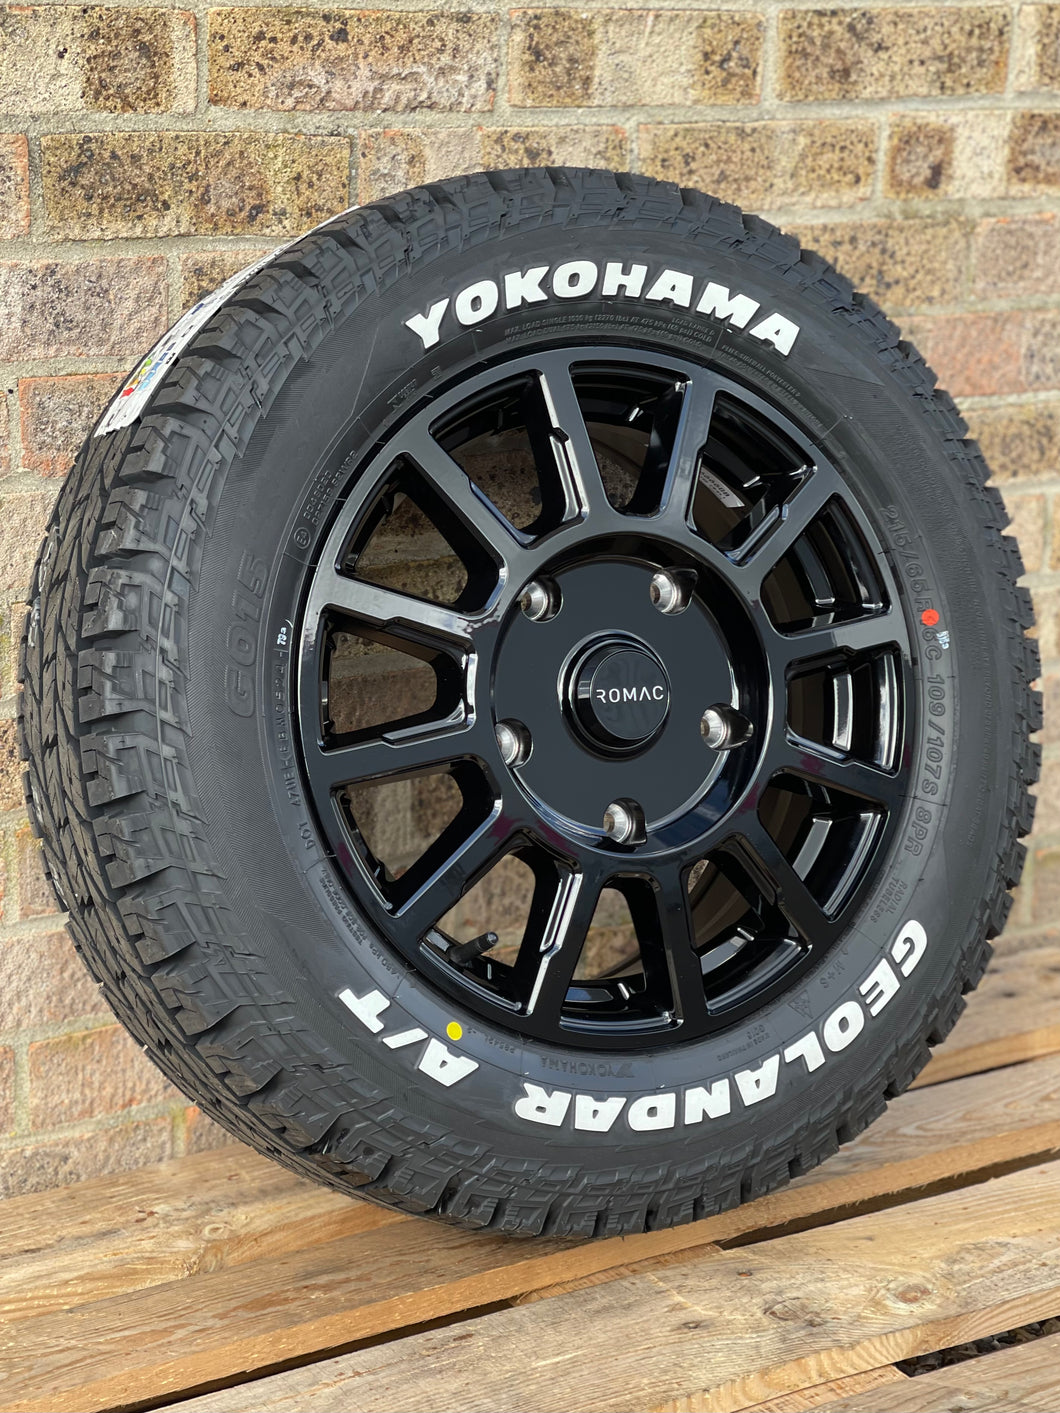 16” Romac Stealth Gloss Black Alloy Wheels and Tyres